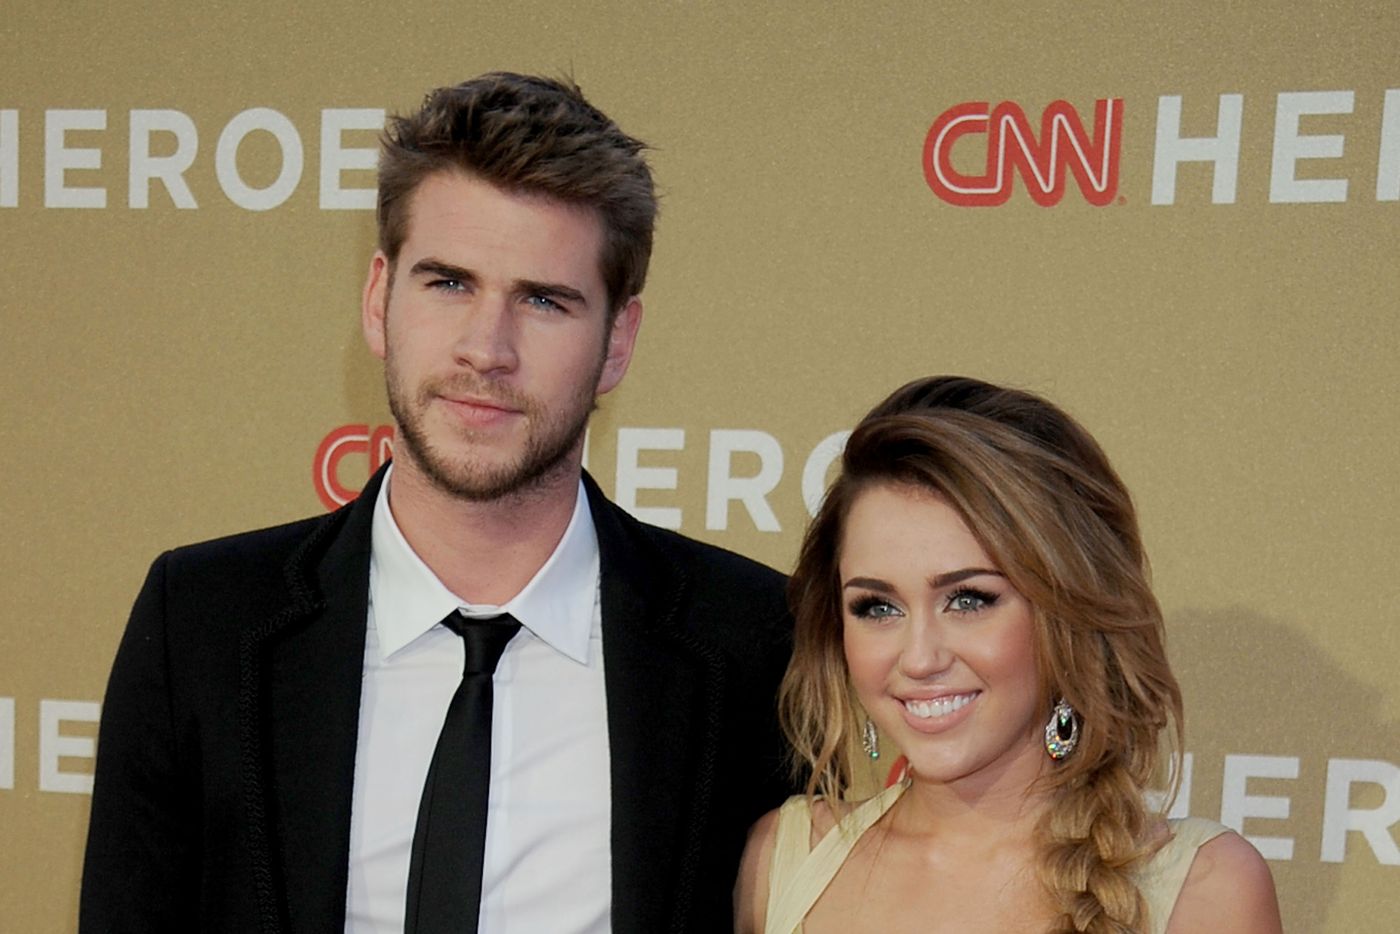 Together liam miley and Miley Cyrus